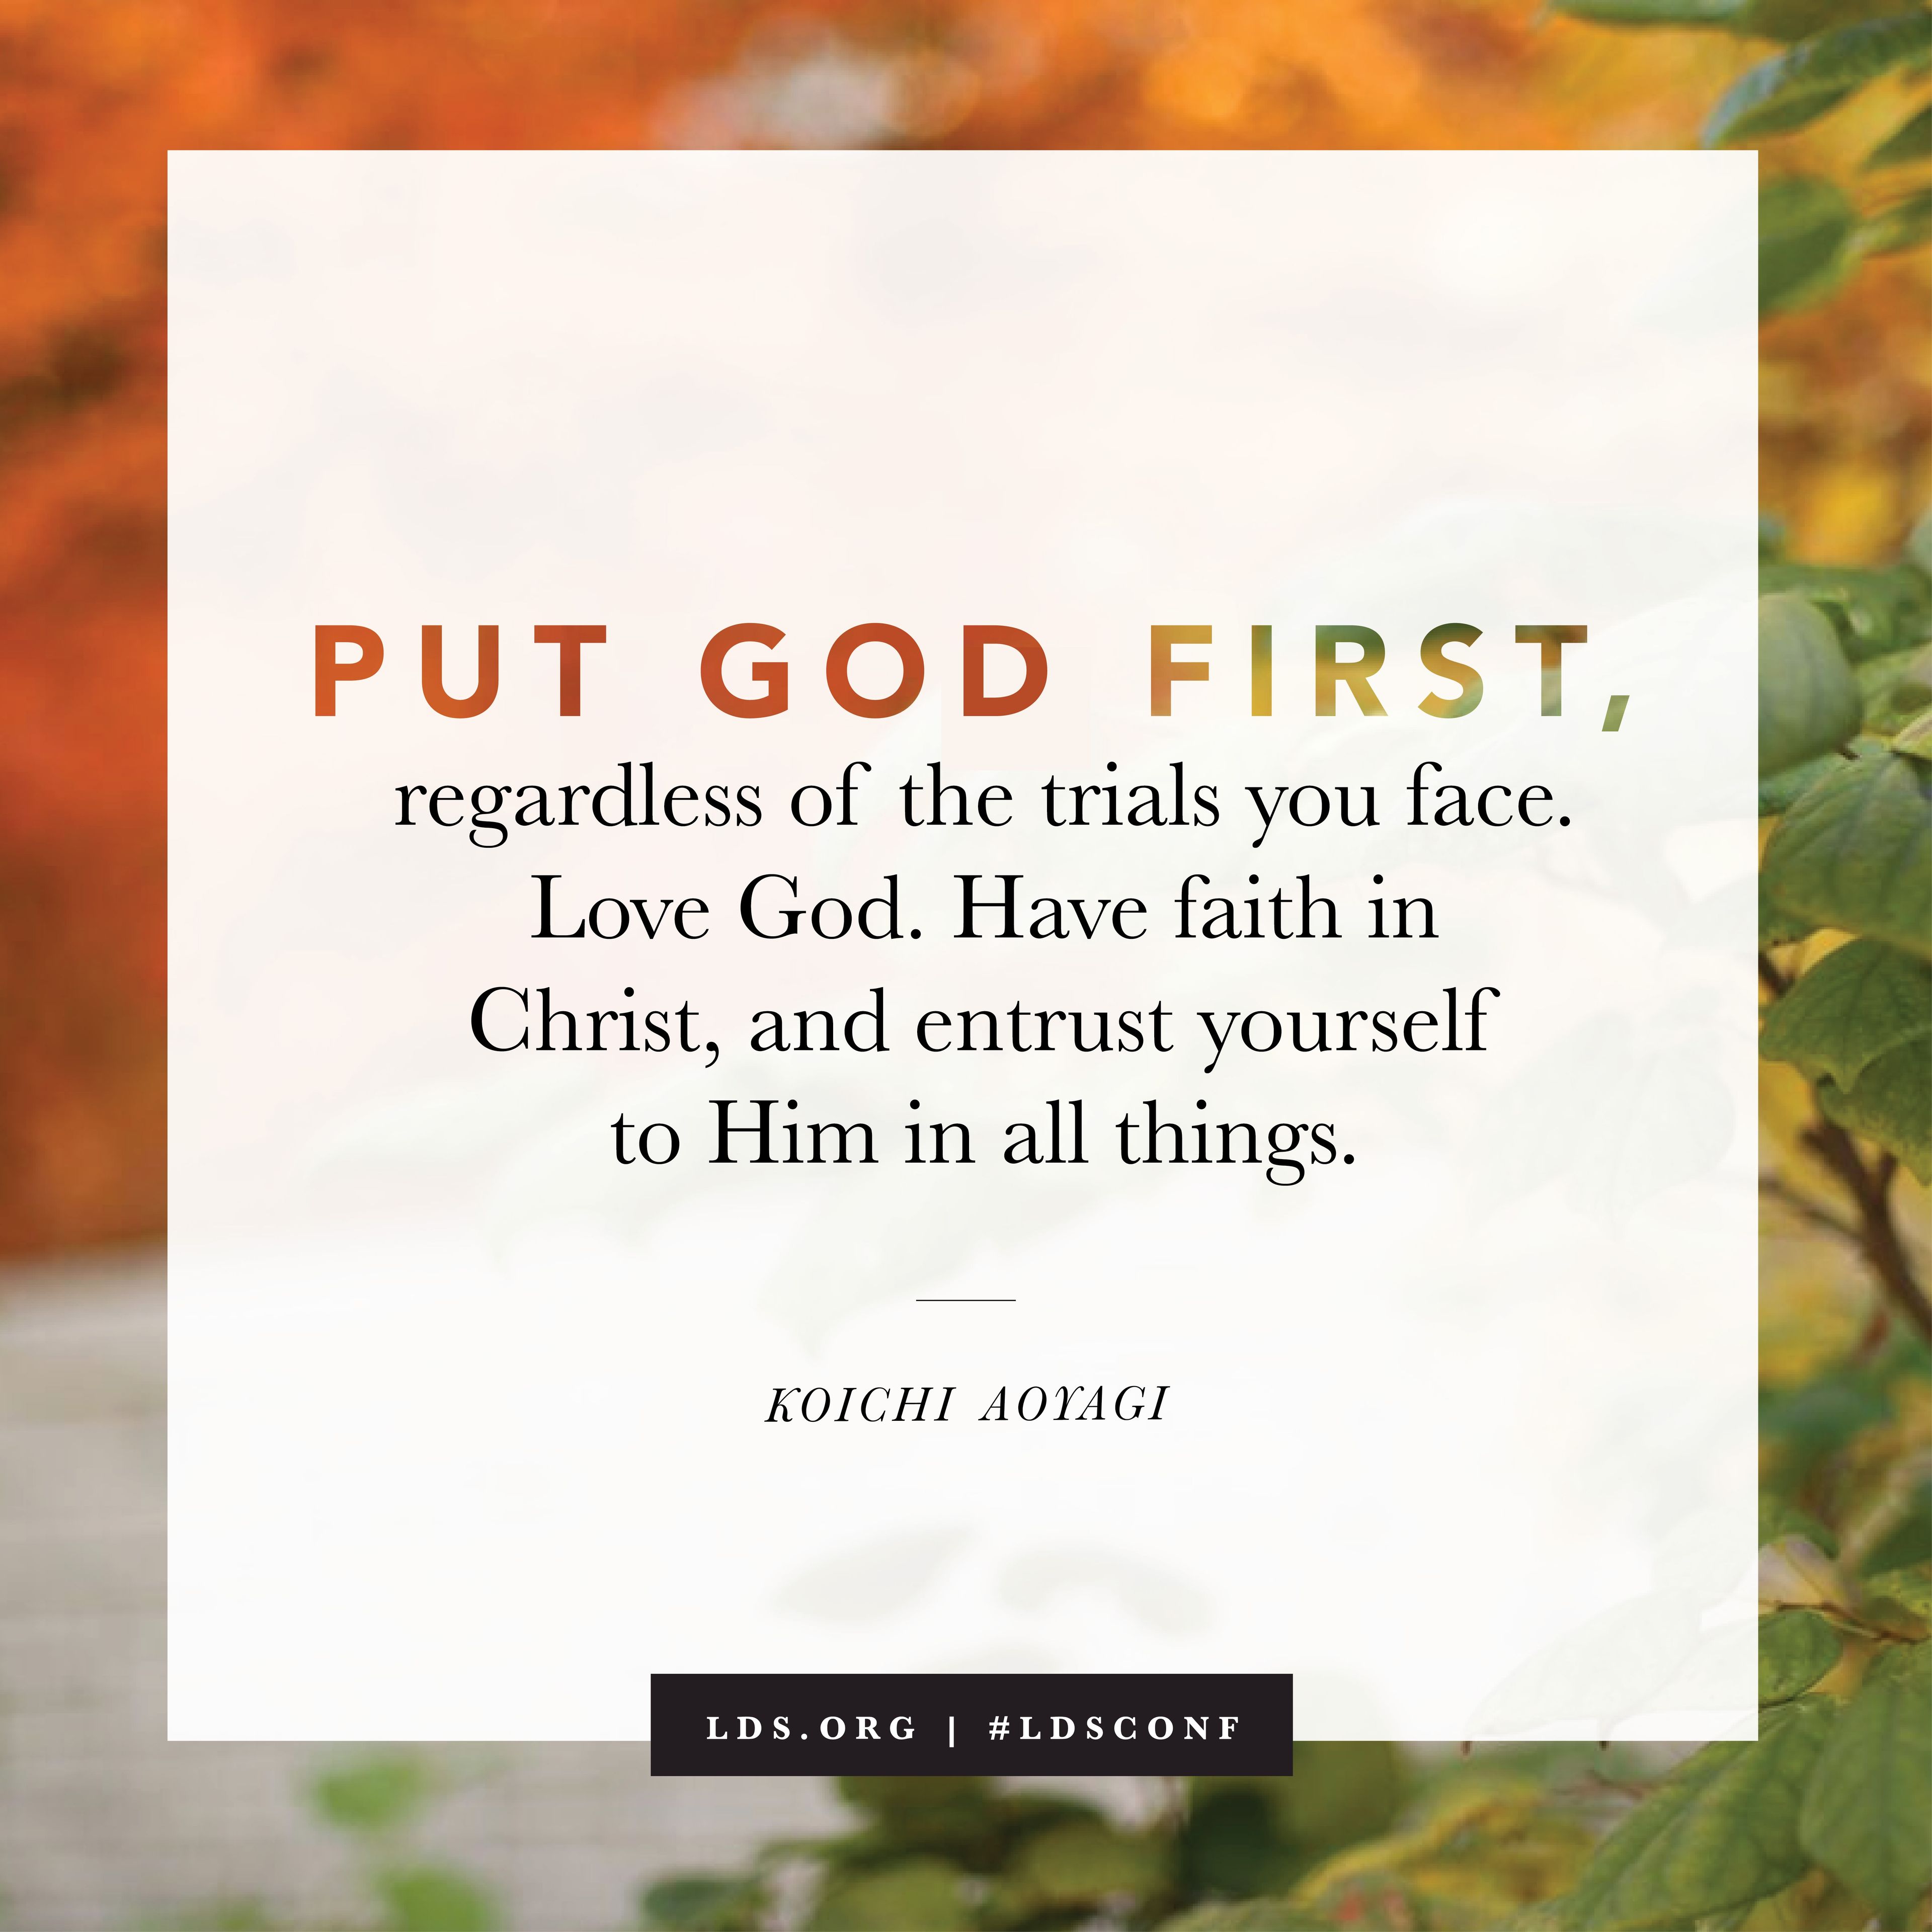 “Put God first, regardless of the trials you face. Love God. Have faith in Christ, and entrust yourself to Him in all things.” —Elder Koichi Aoyagi, “Hold on Thy Way” © See Individual Images ipCode 1.